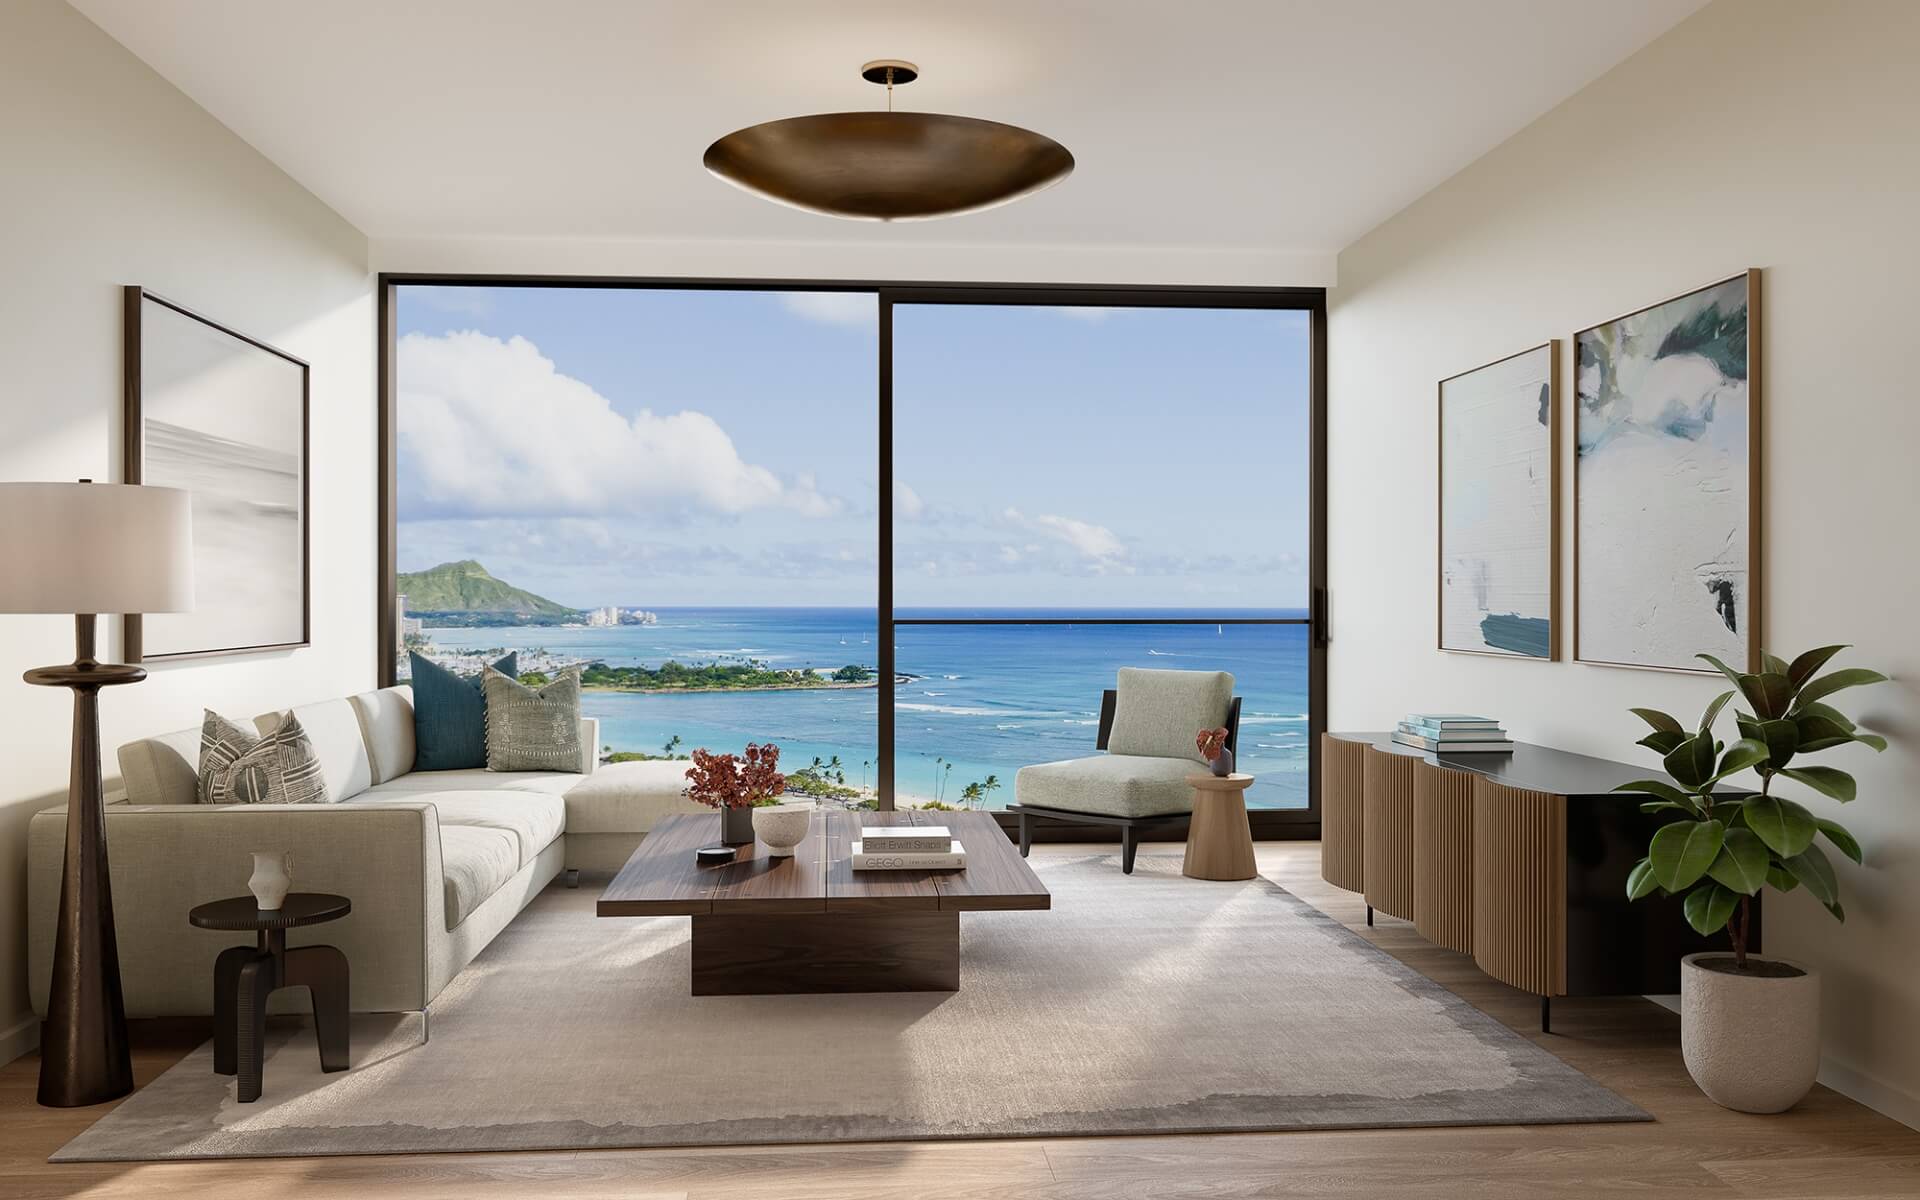 Kalae two bedroom Residence 02 Living Room with ocean and Diamond Head views.